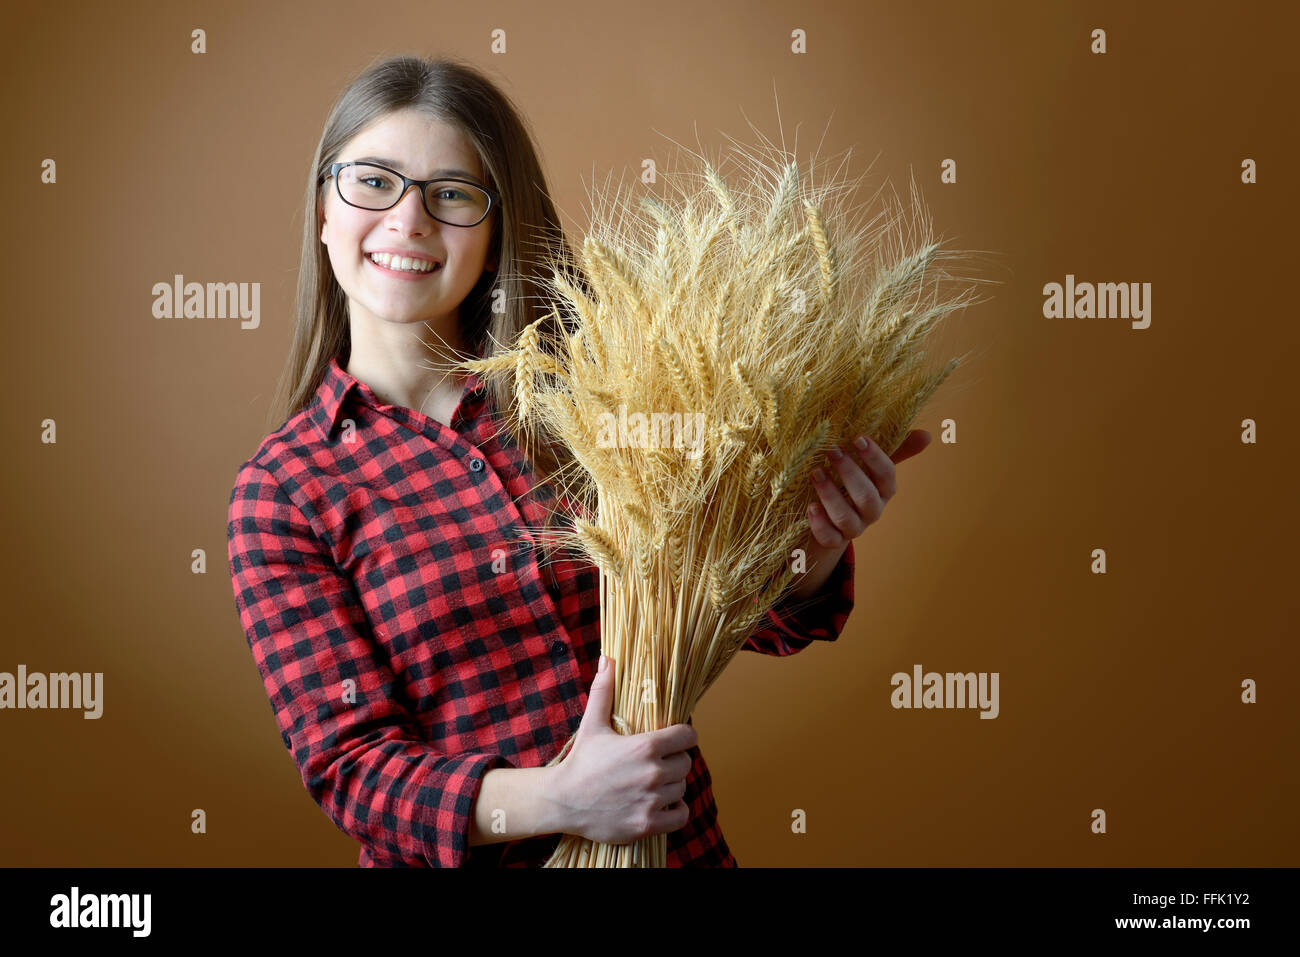 teen girl hold in hand bunch of wheat stalks Stock Photo